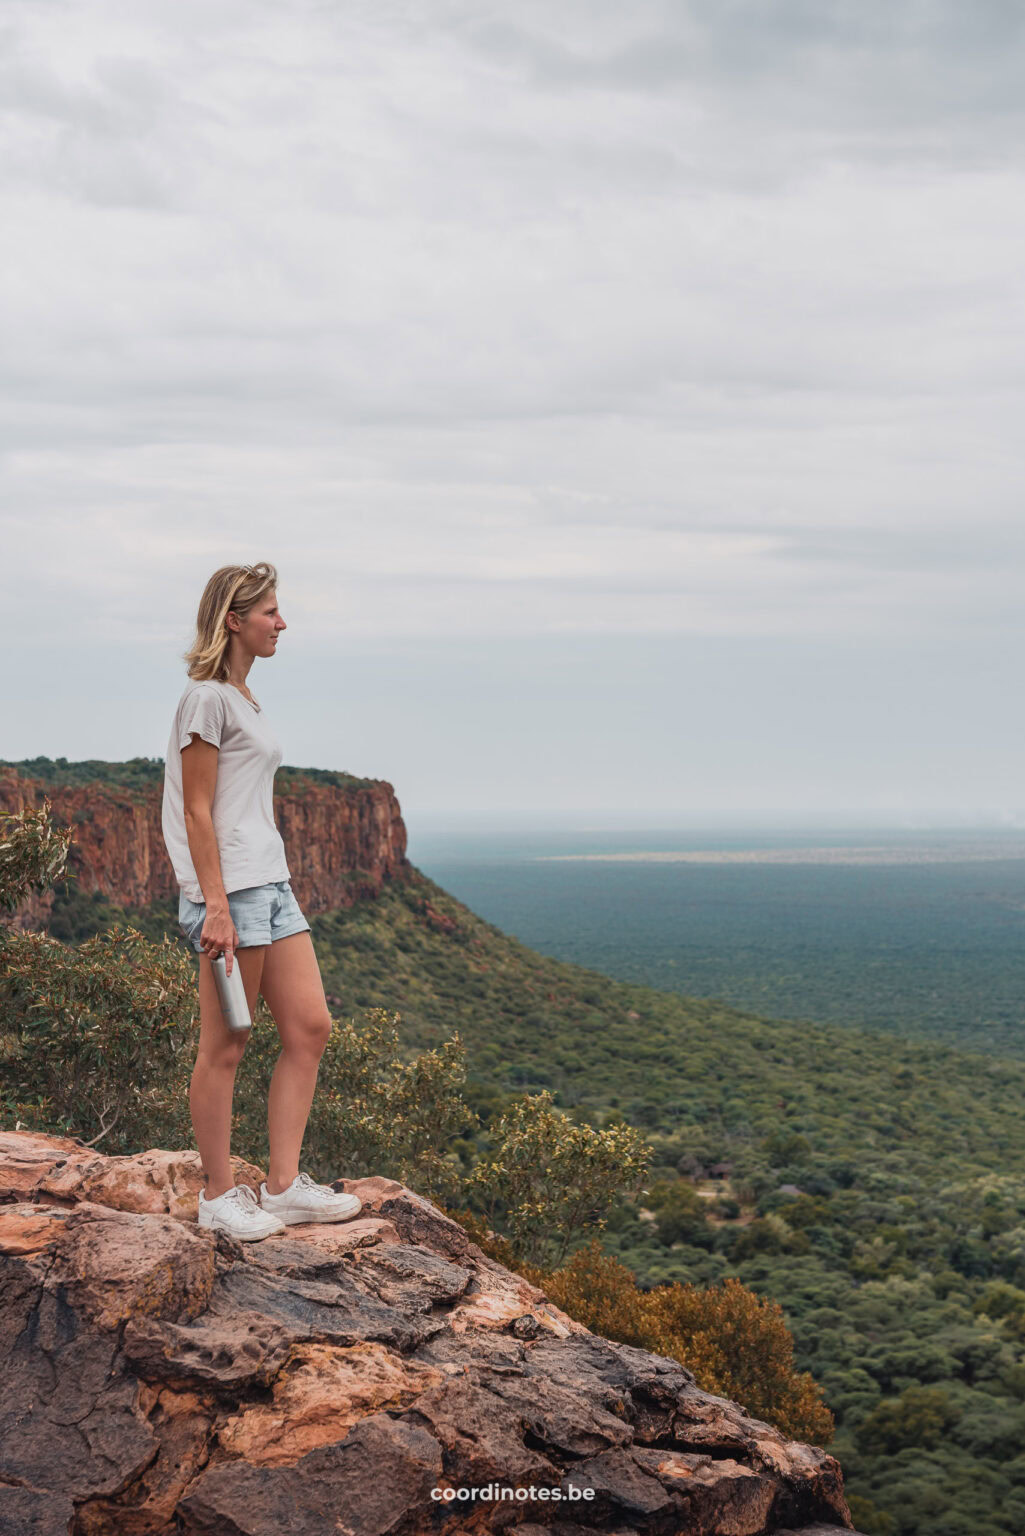 Viewpoint at the Waterberg Plateau